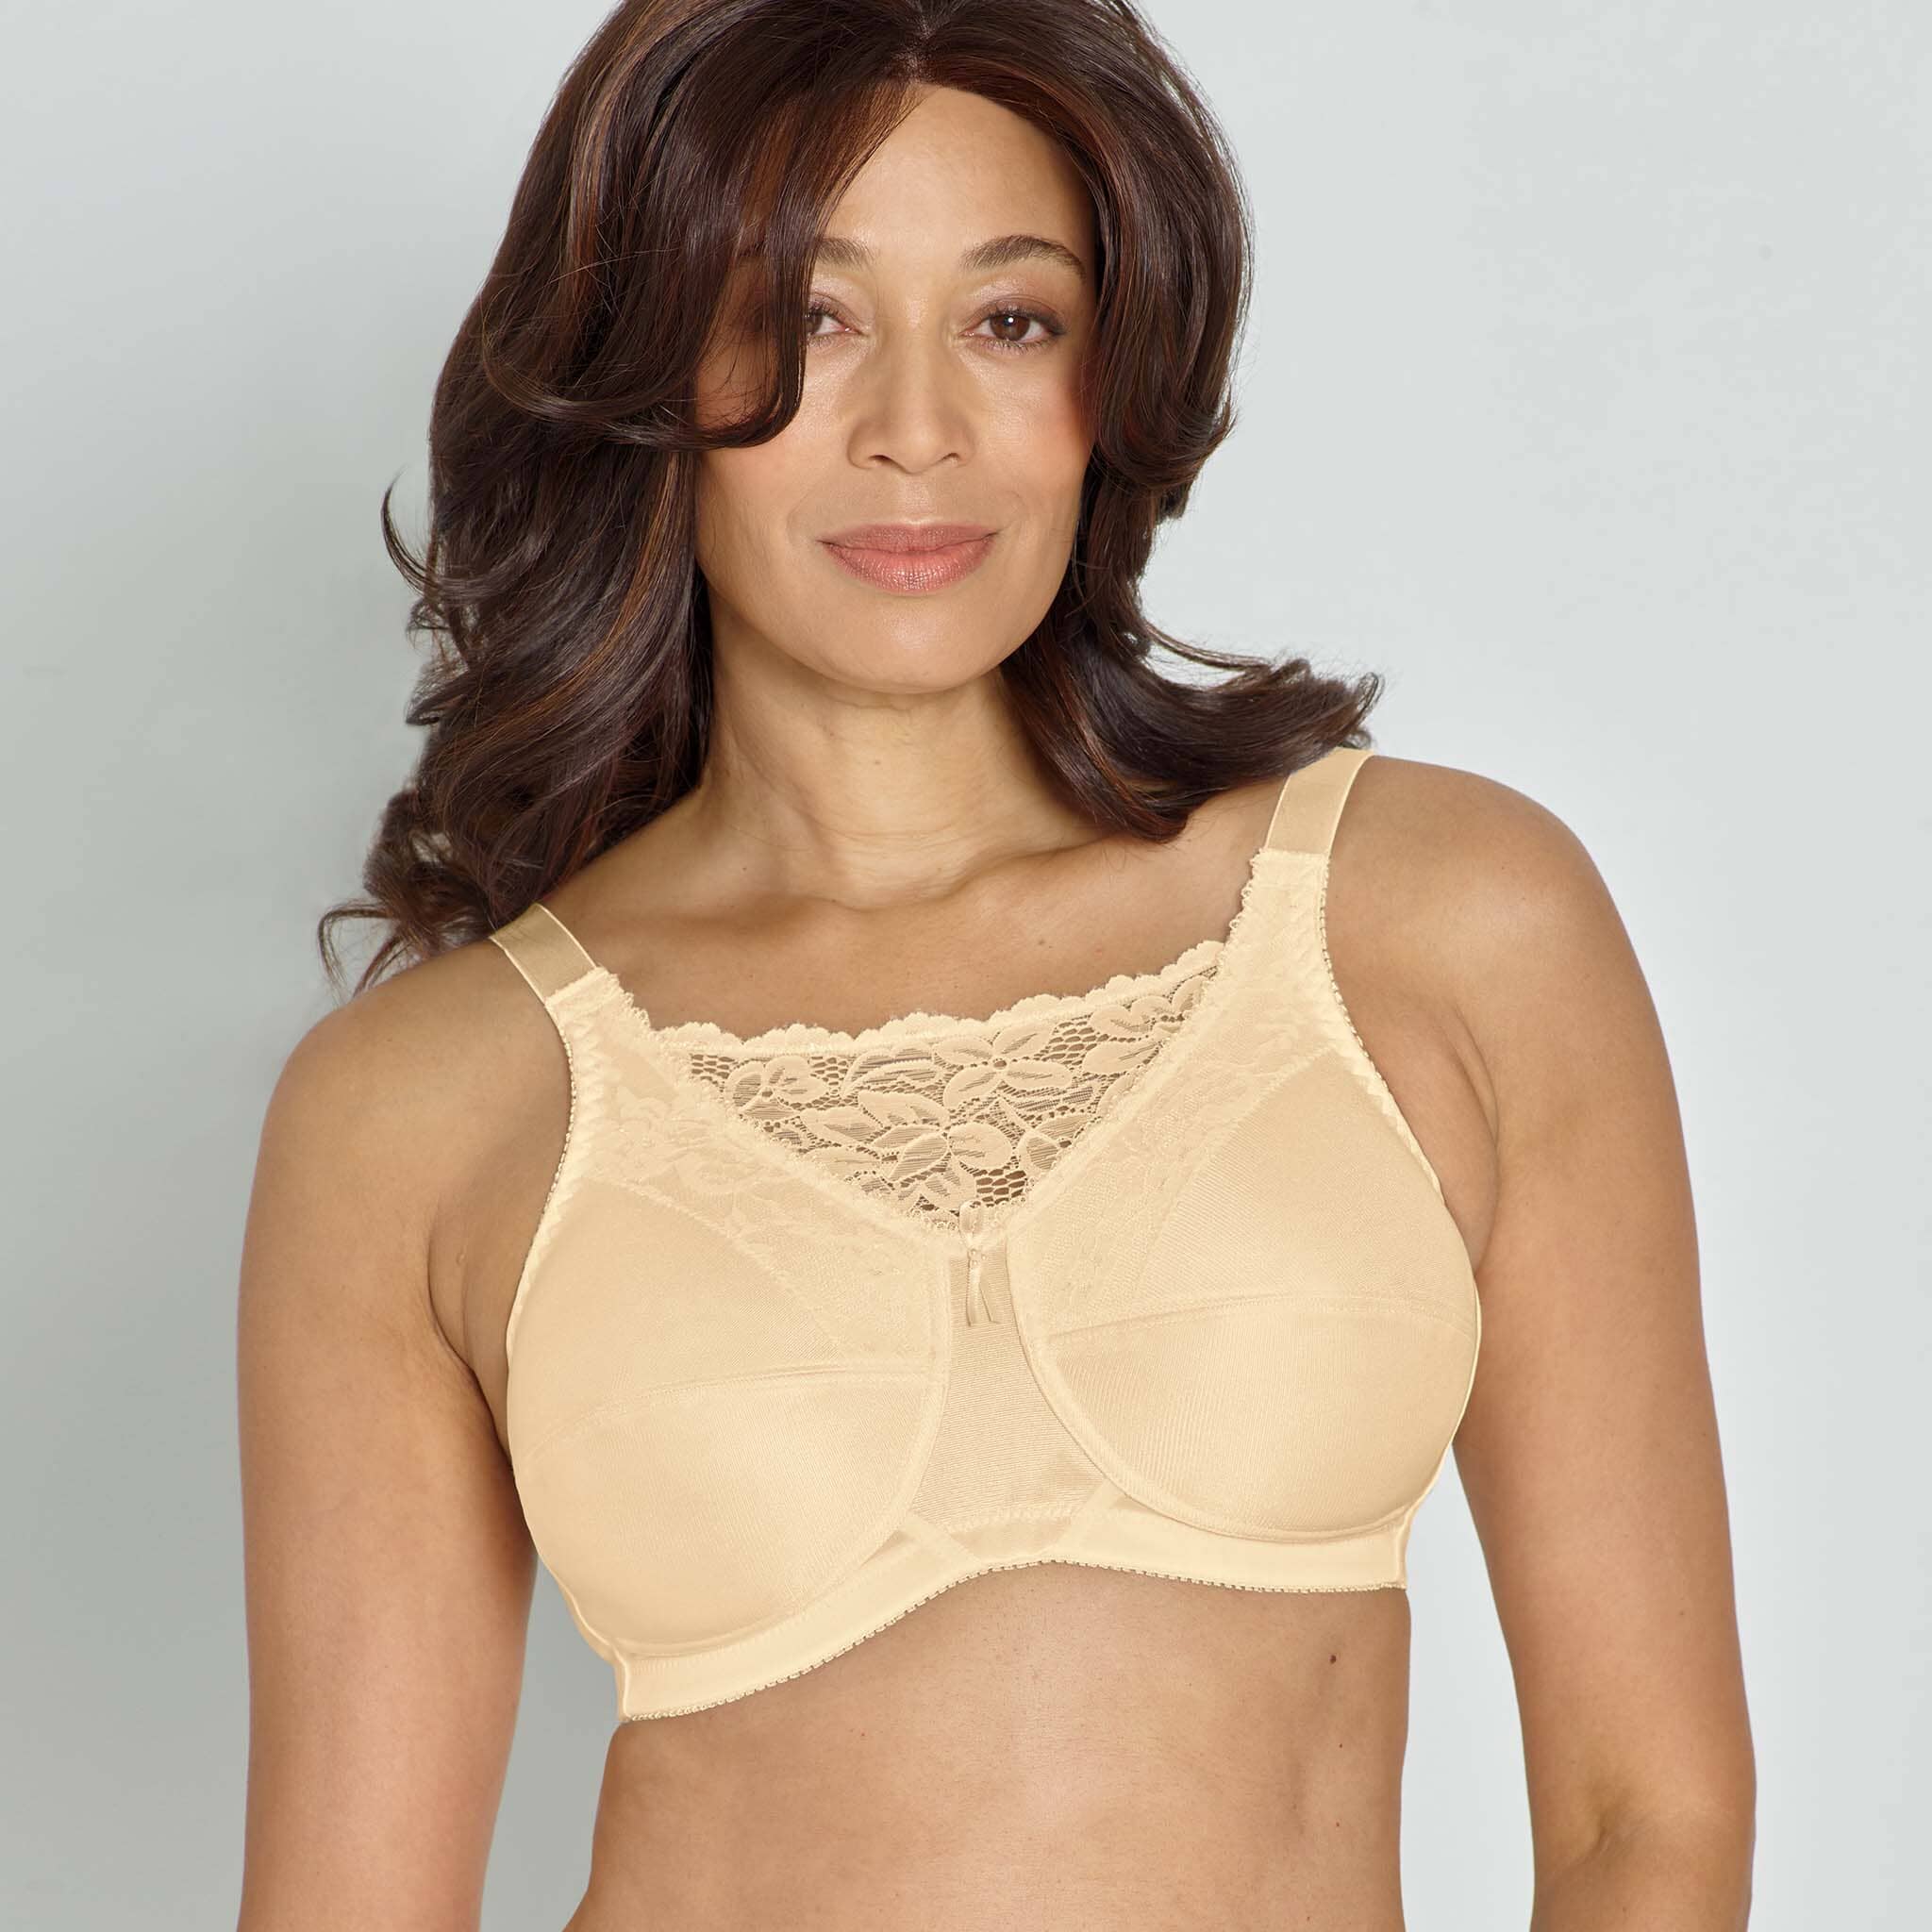 Search results for: '42a bra